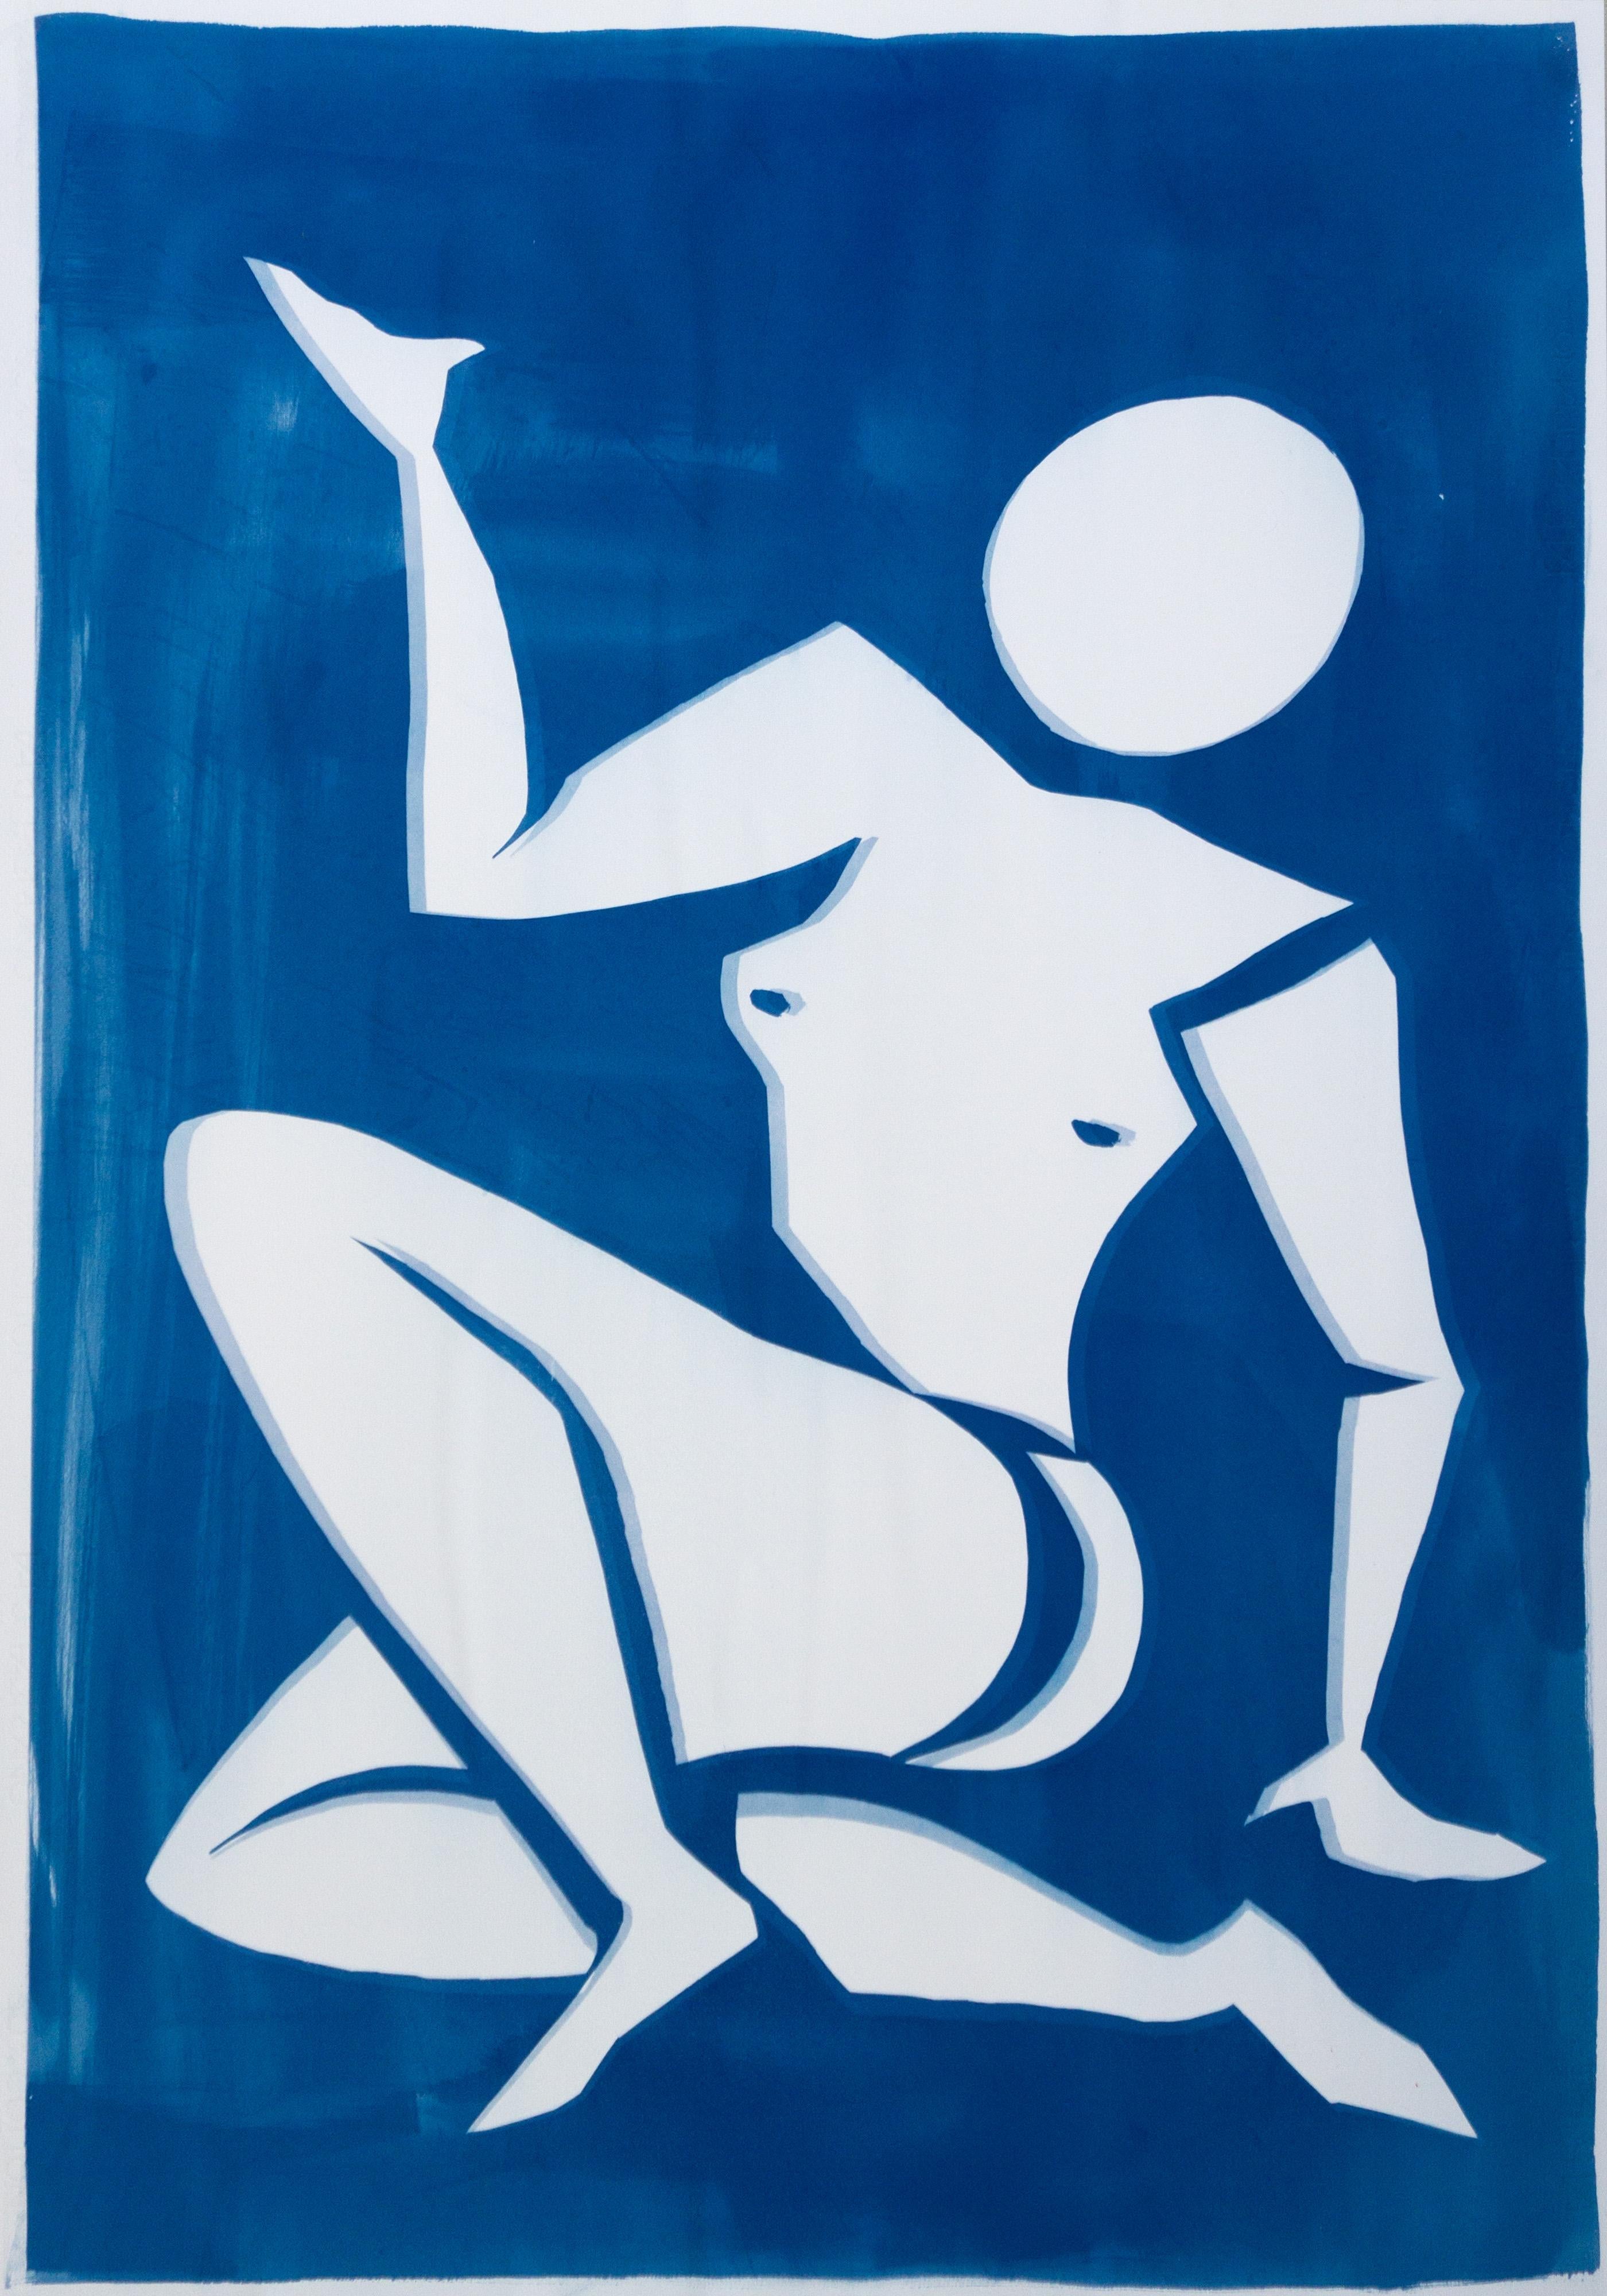 Kind of Cyan Figurative Print - Matisse Cutout Inspiration, Blue Nude Classical Cyanotype on Watercolor Paper